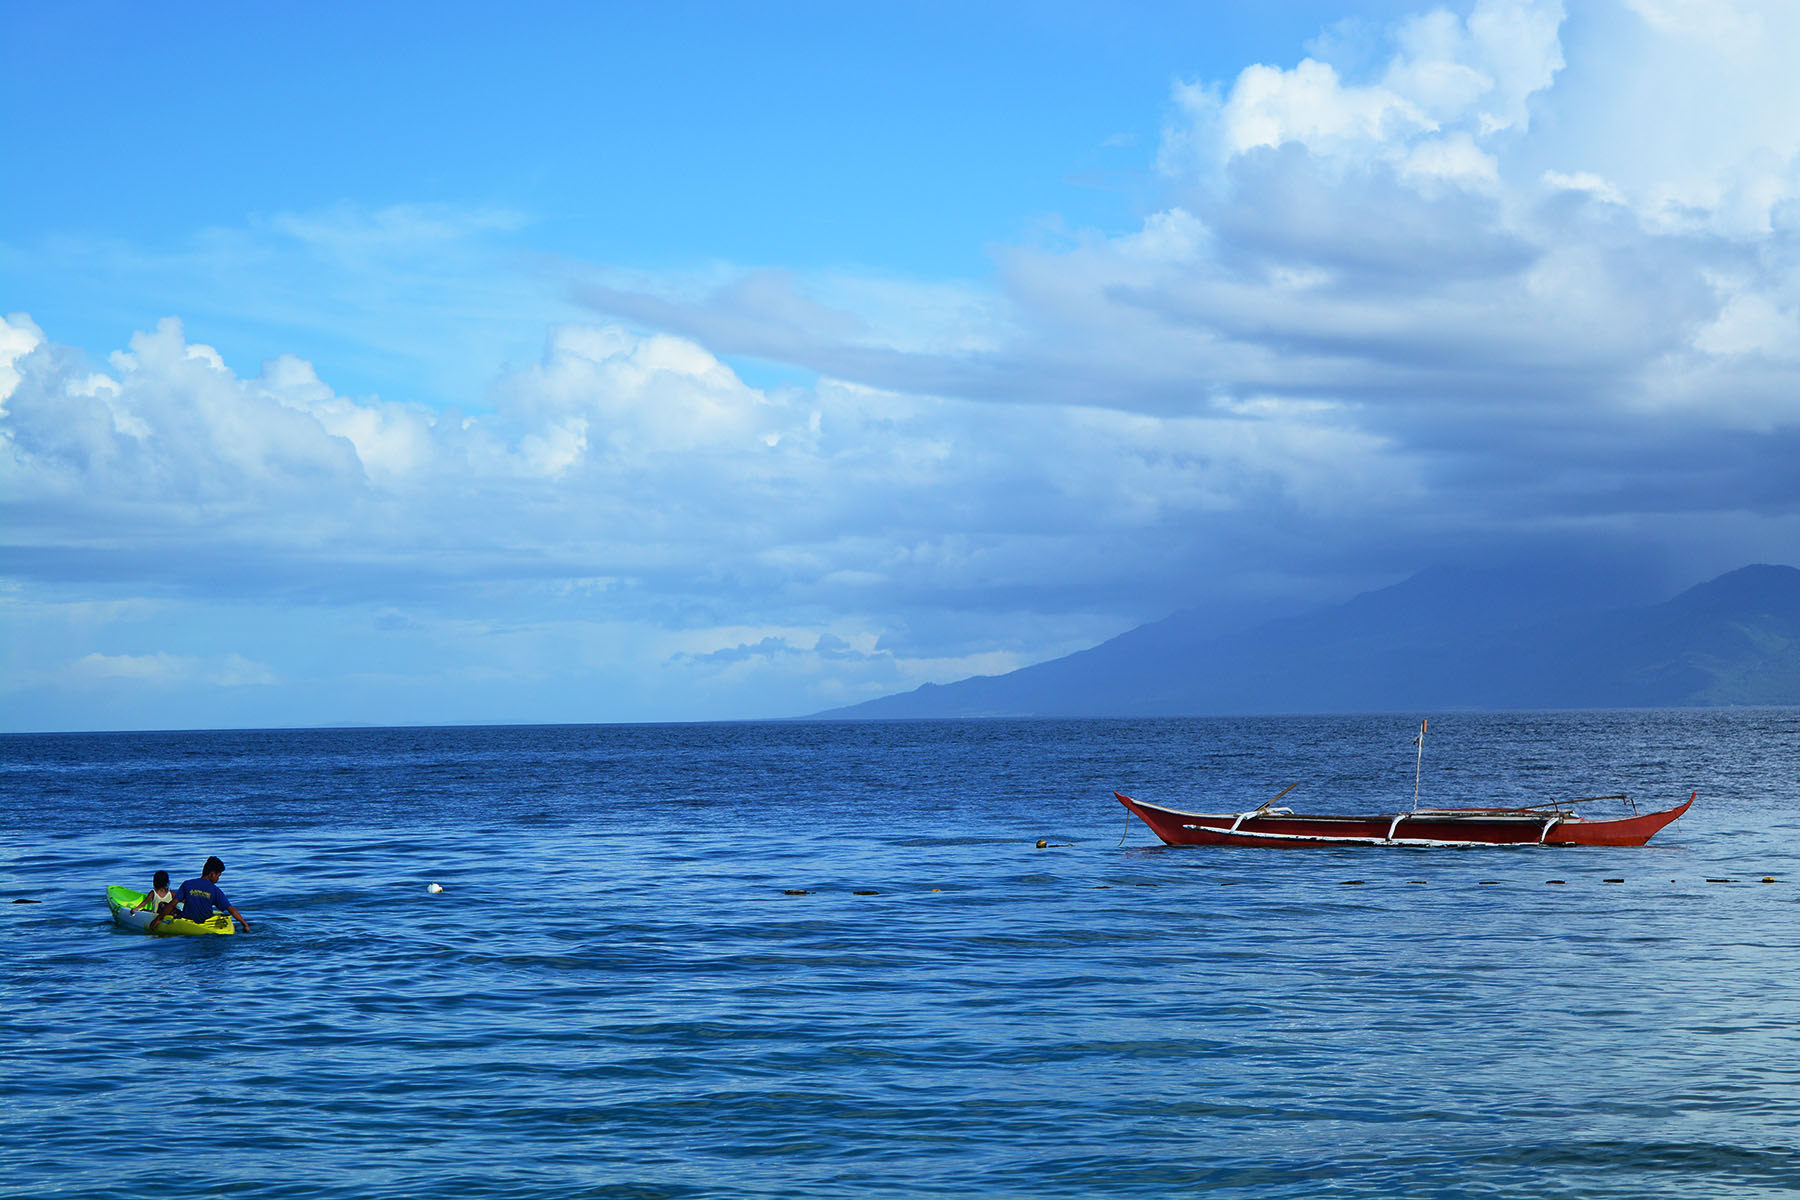 LEYTE & BILIRAN: 5-Day Budget Travel Guide + Itinerary